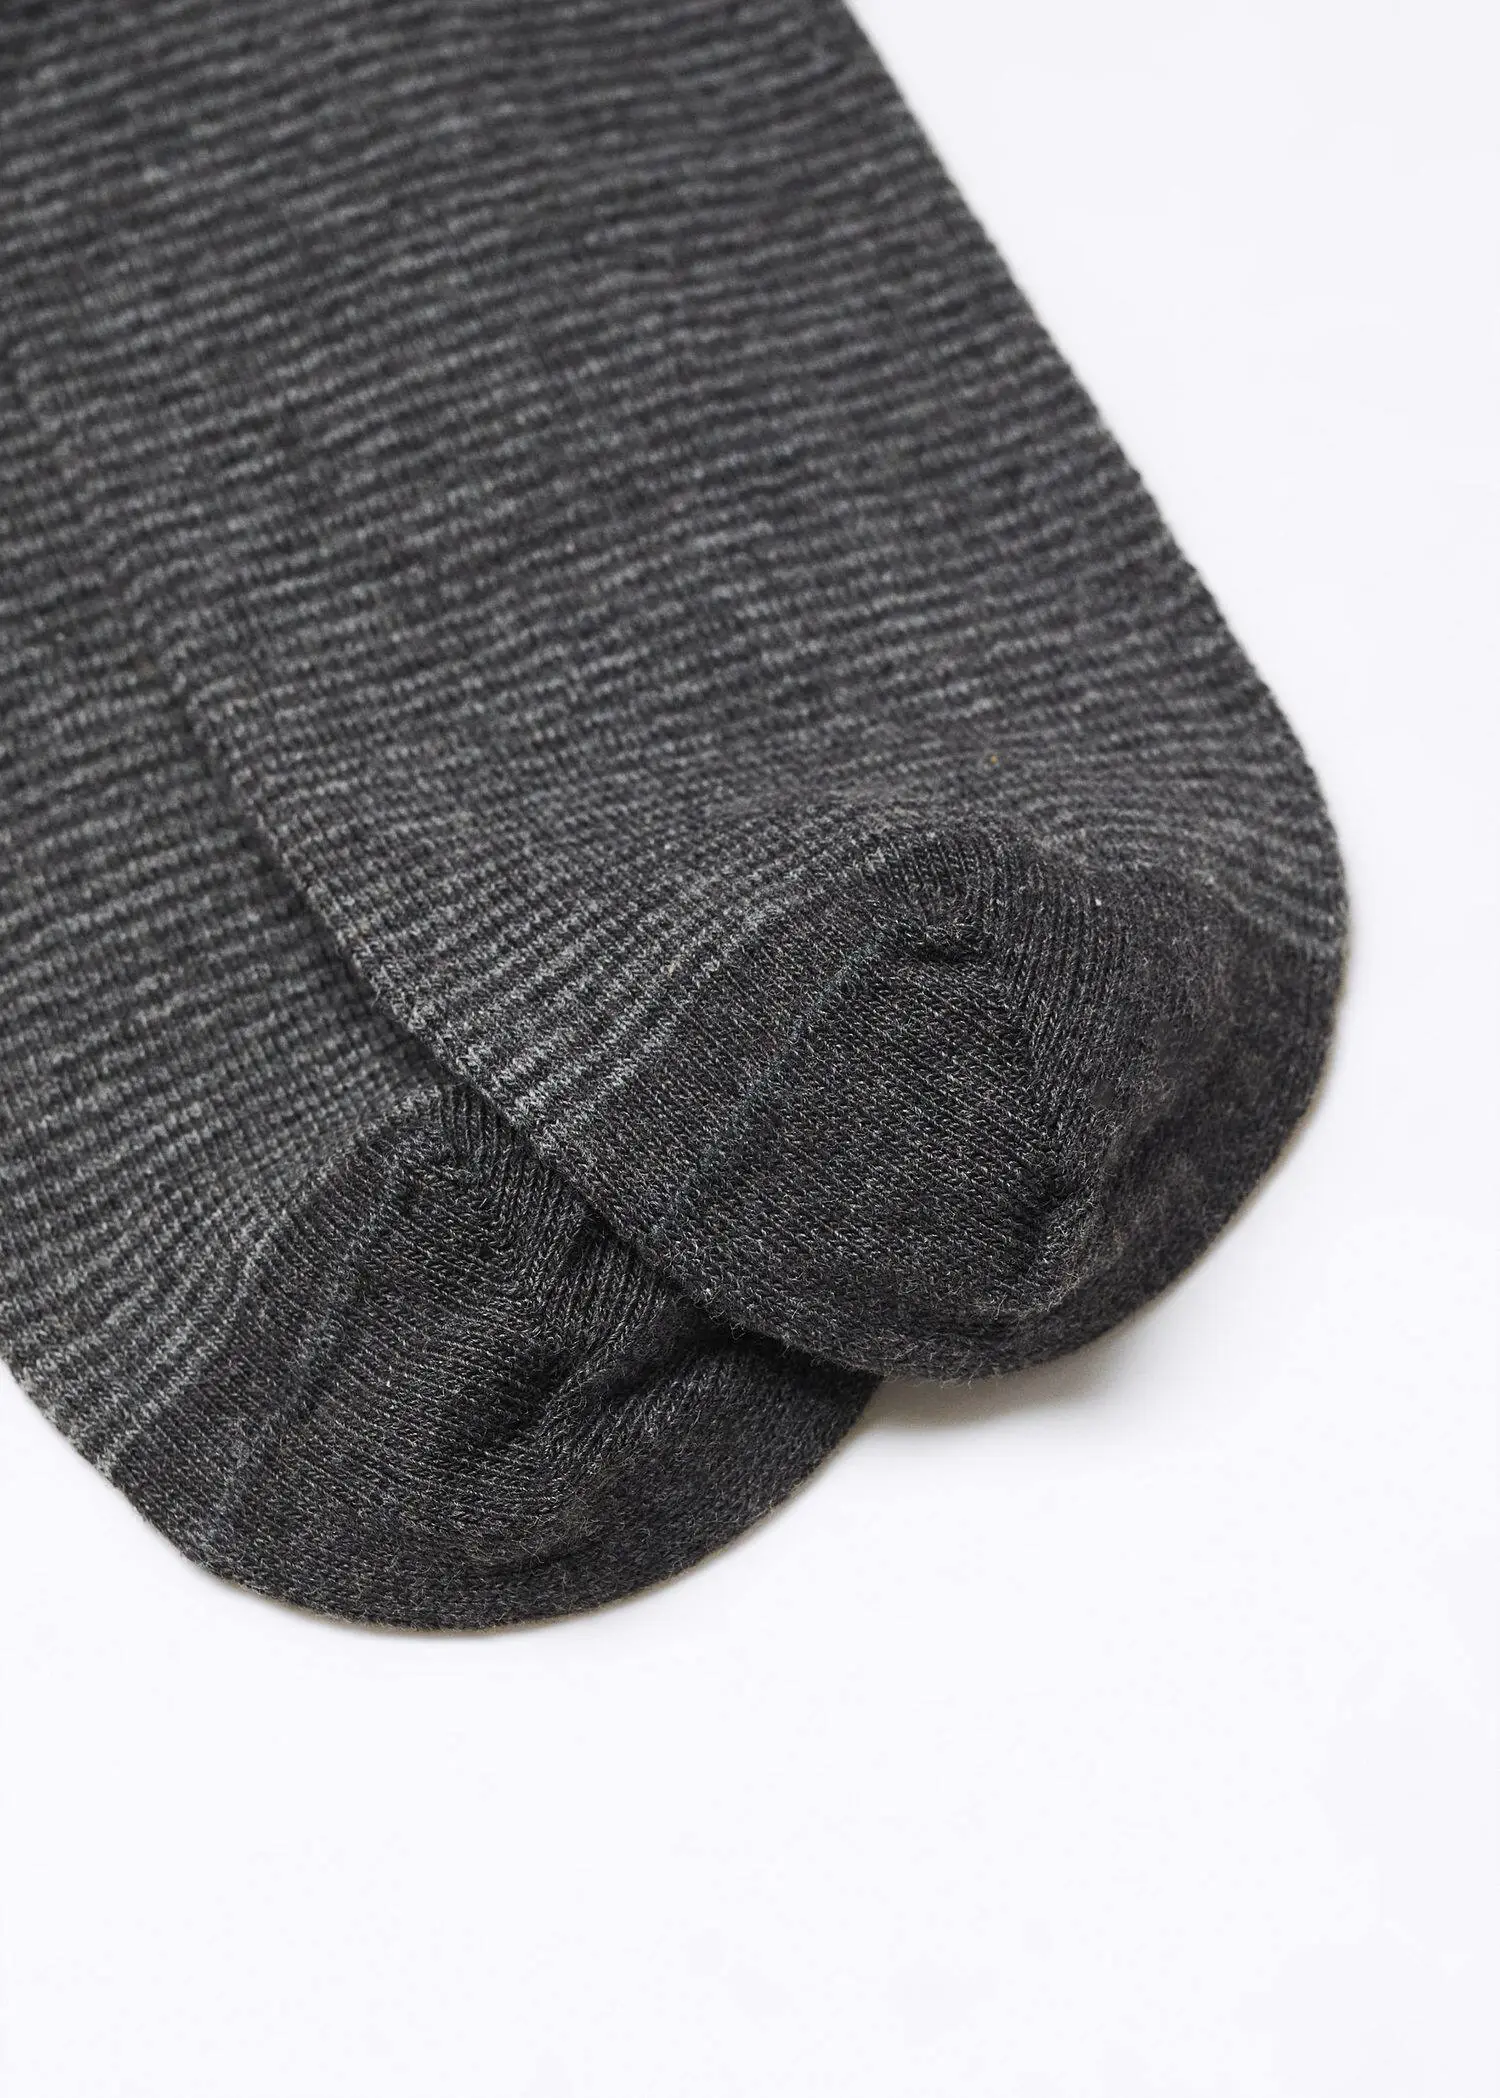 Mango Striped cotton socks. a close up view of a pair of socks. 